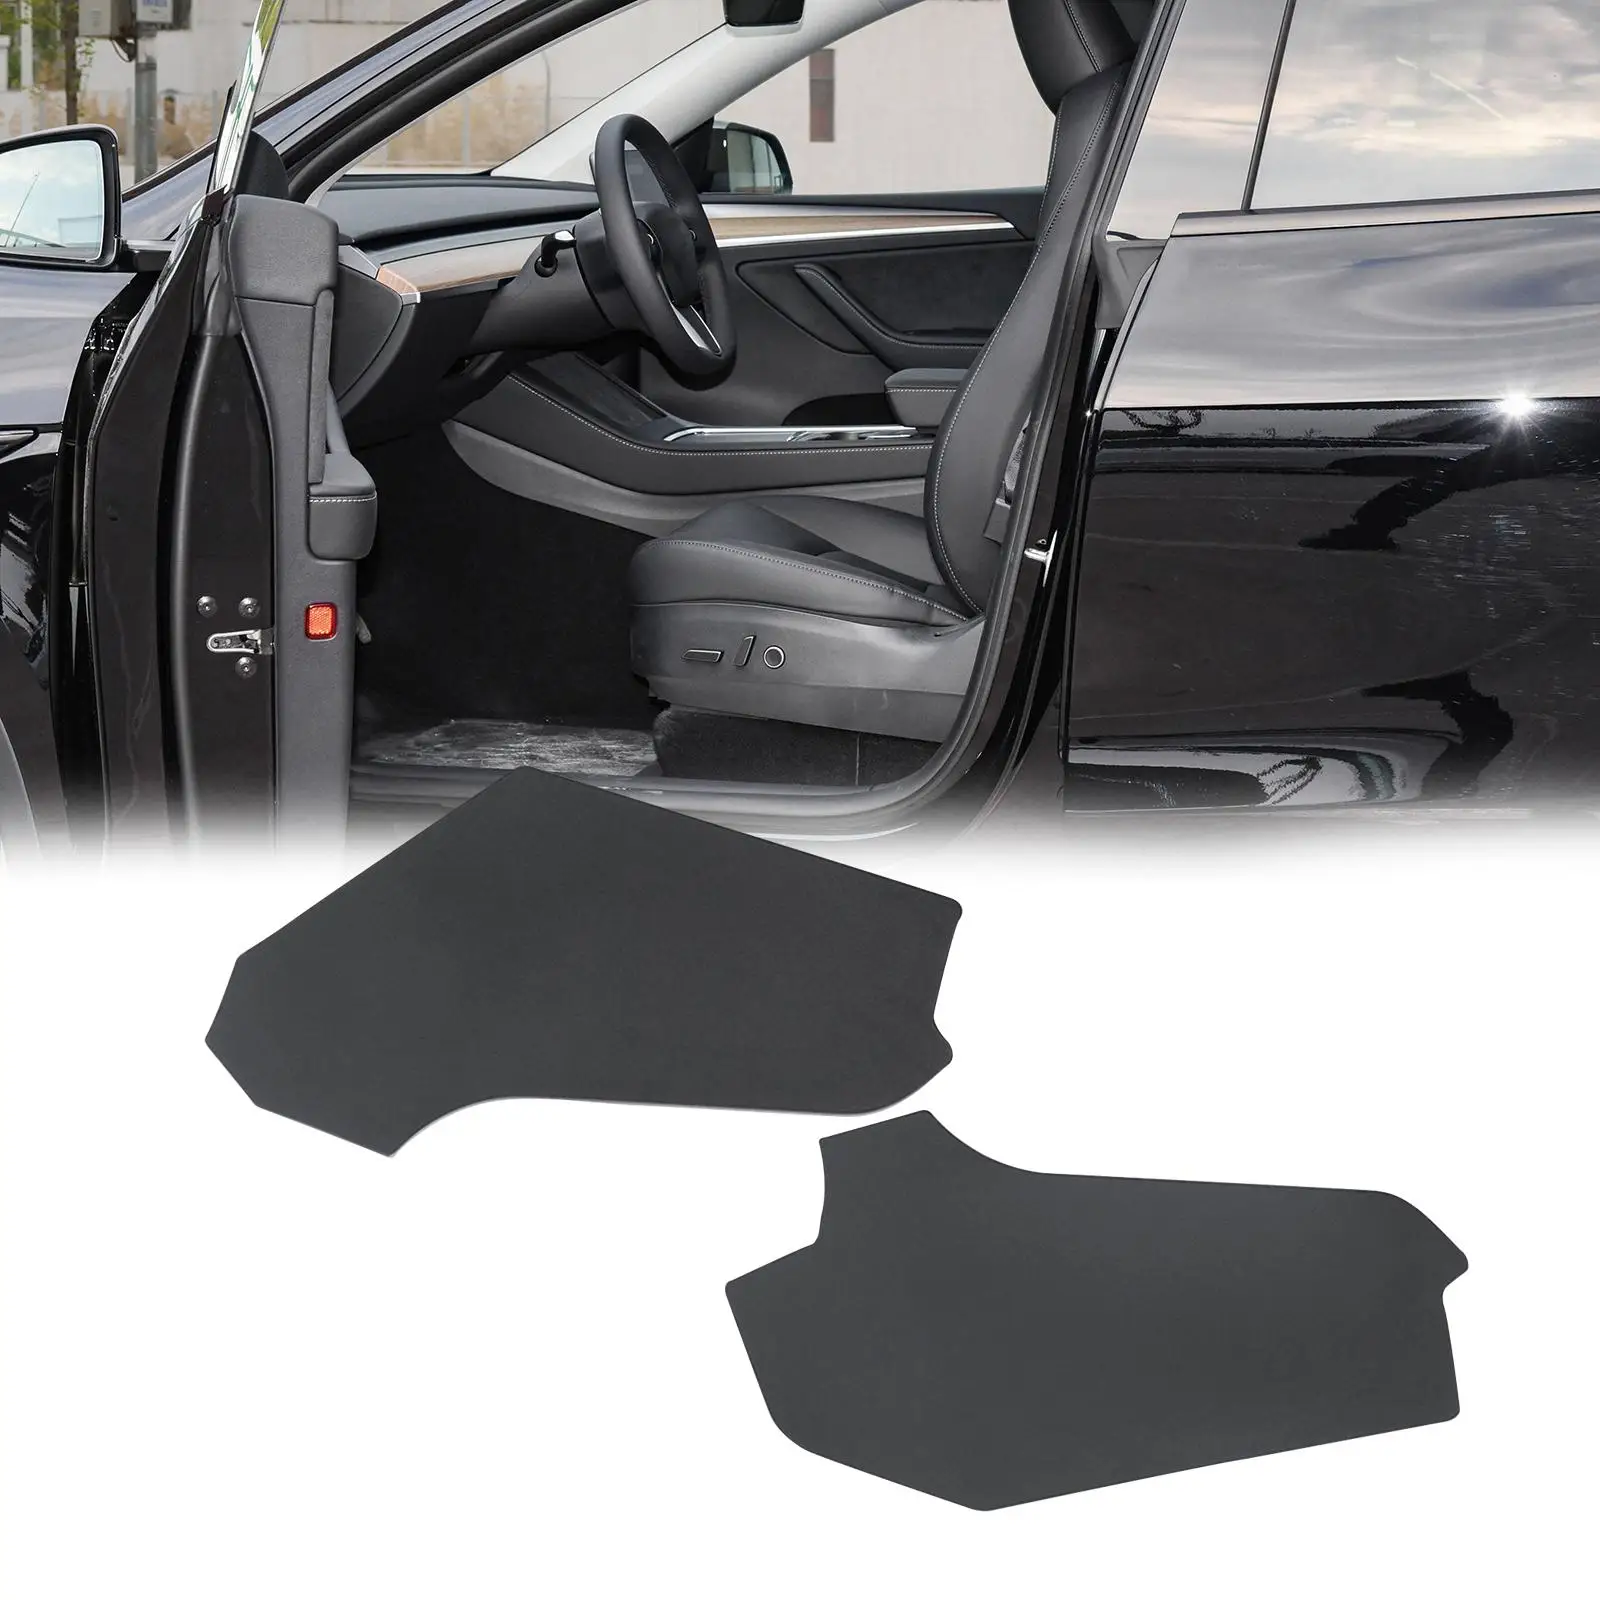 2 Pieces Center Console Side Anti Kick Mat Car Interior Accessories Replacement Dirt Protector Cover Pad for Tesla Model Y